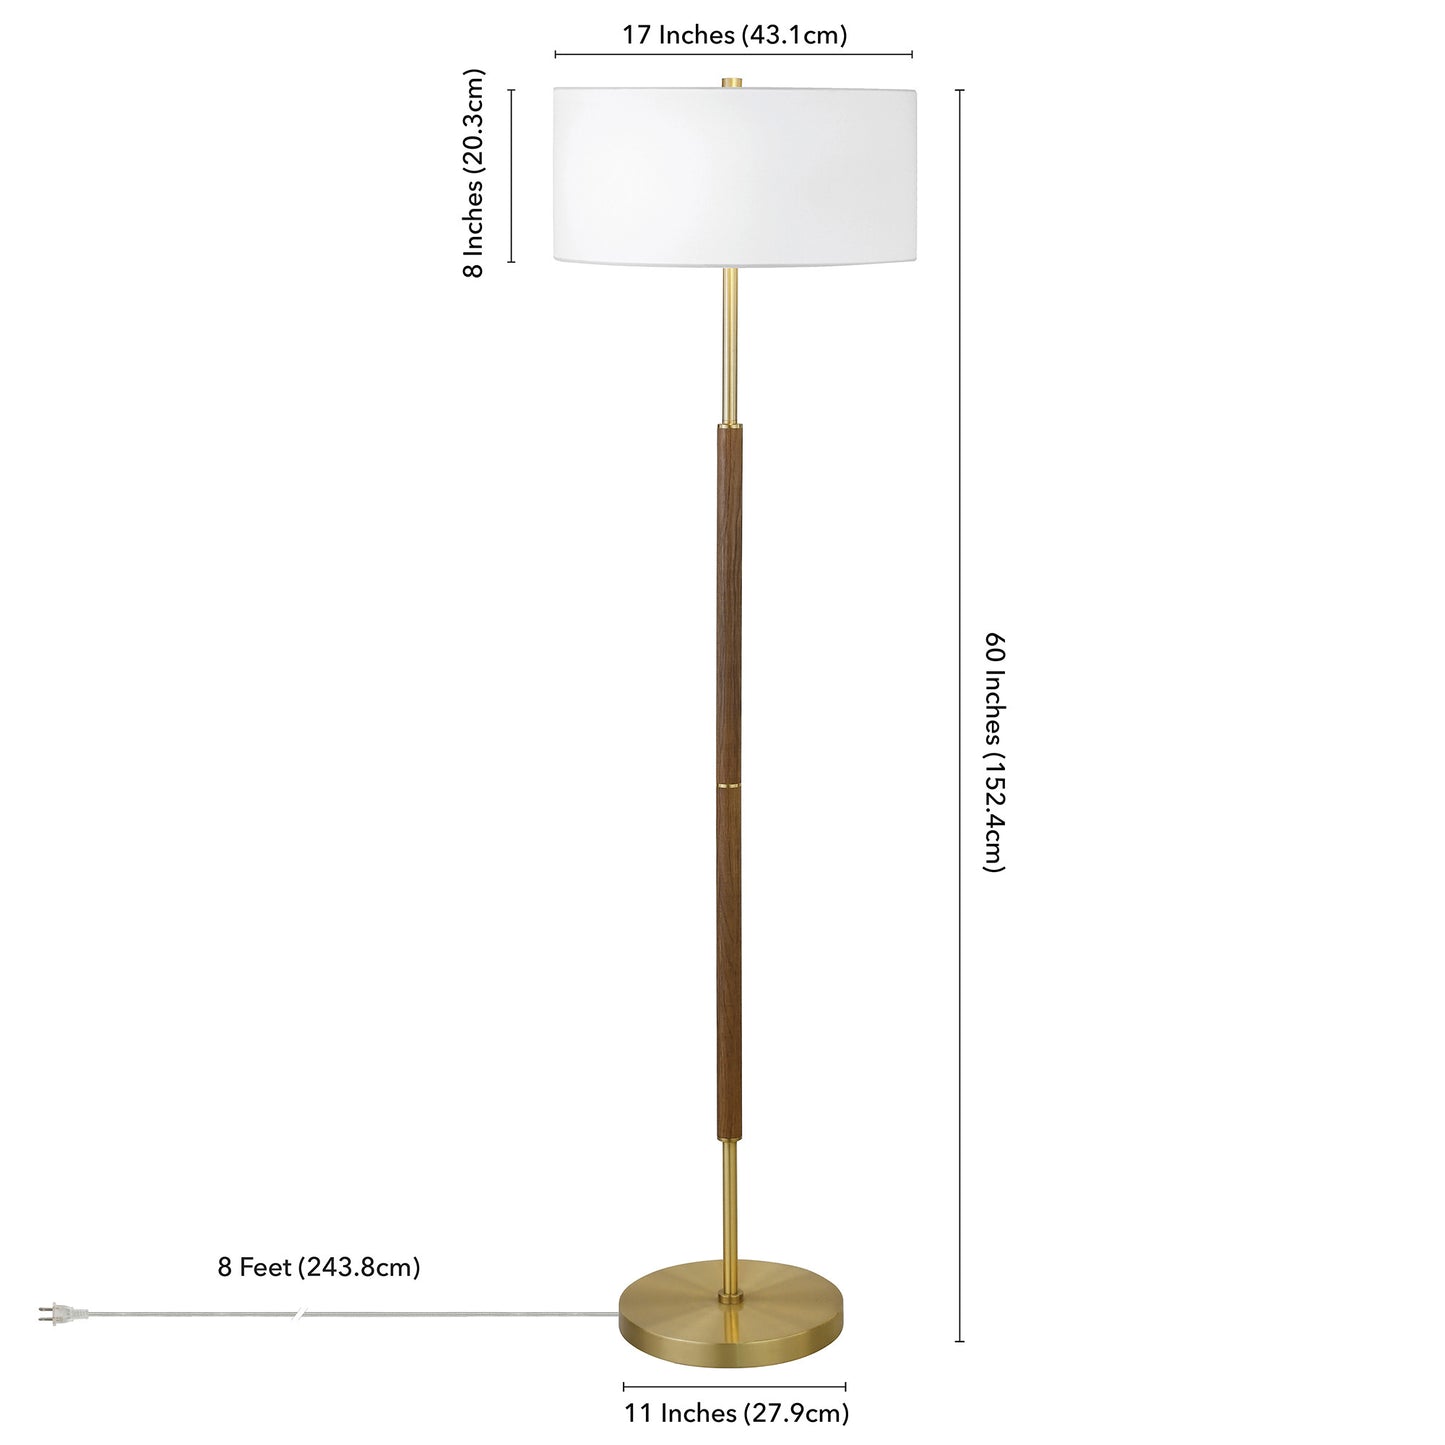 61" Brass Two Light Floor Lamp With White Frosted Glass Drum Shade